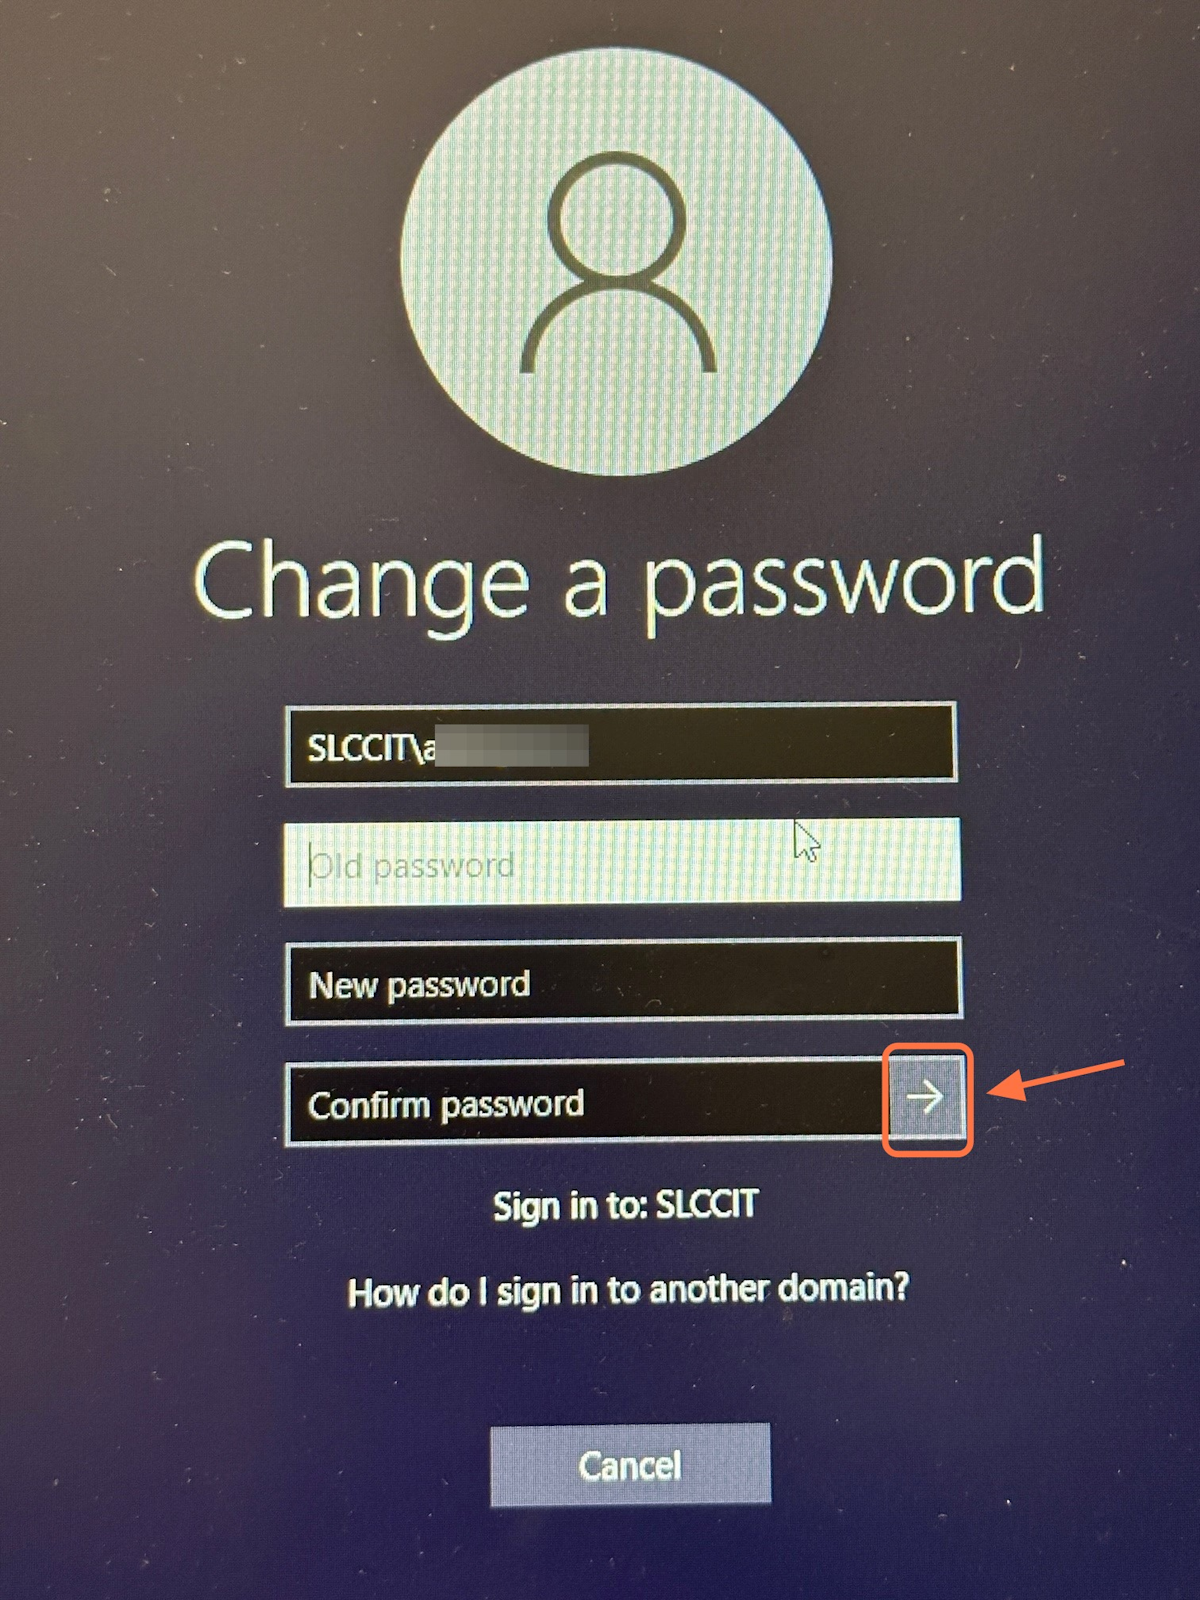 Click the arrow, and your password is changed.